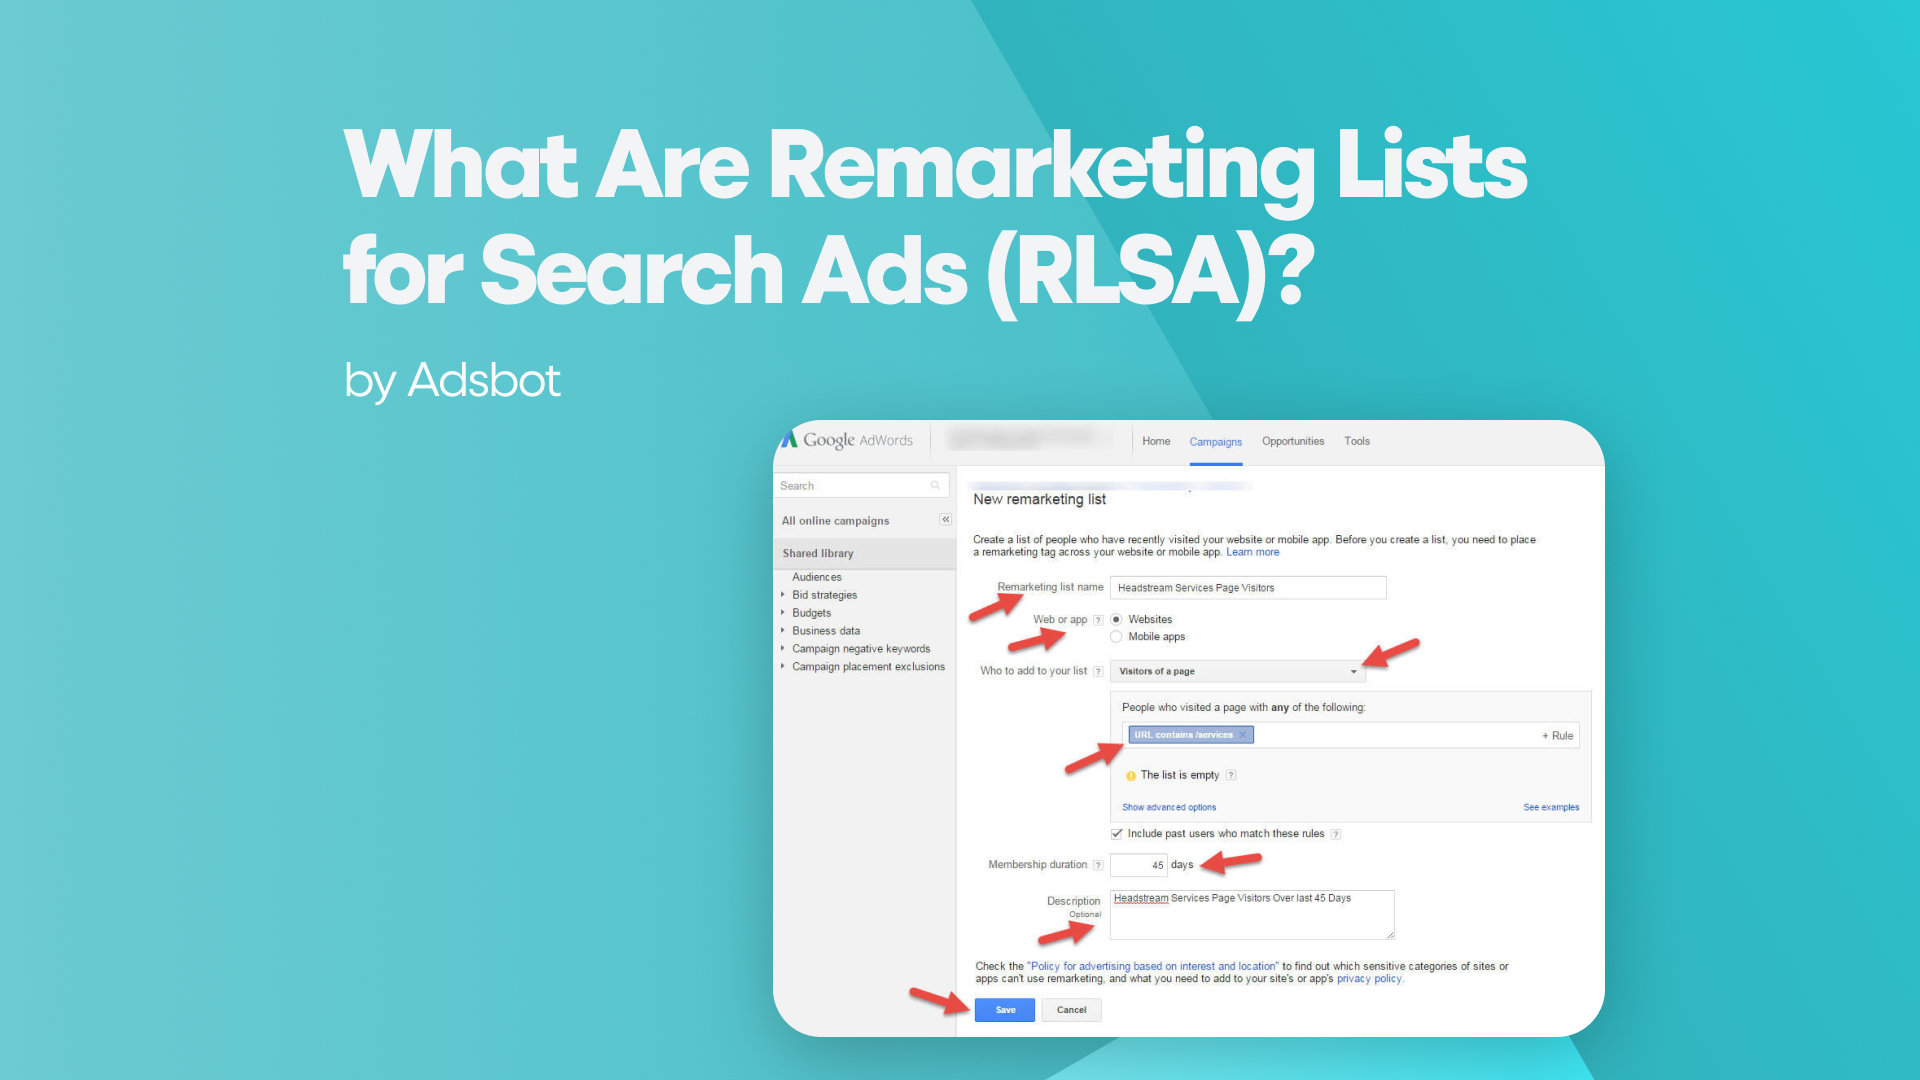 What are Remarketing Lists for Search Ads (RLSA)?